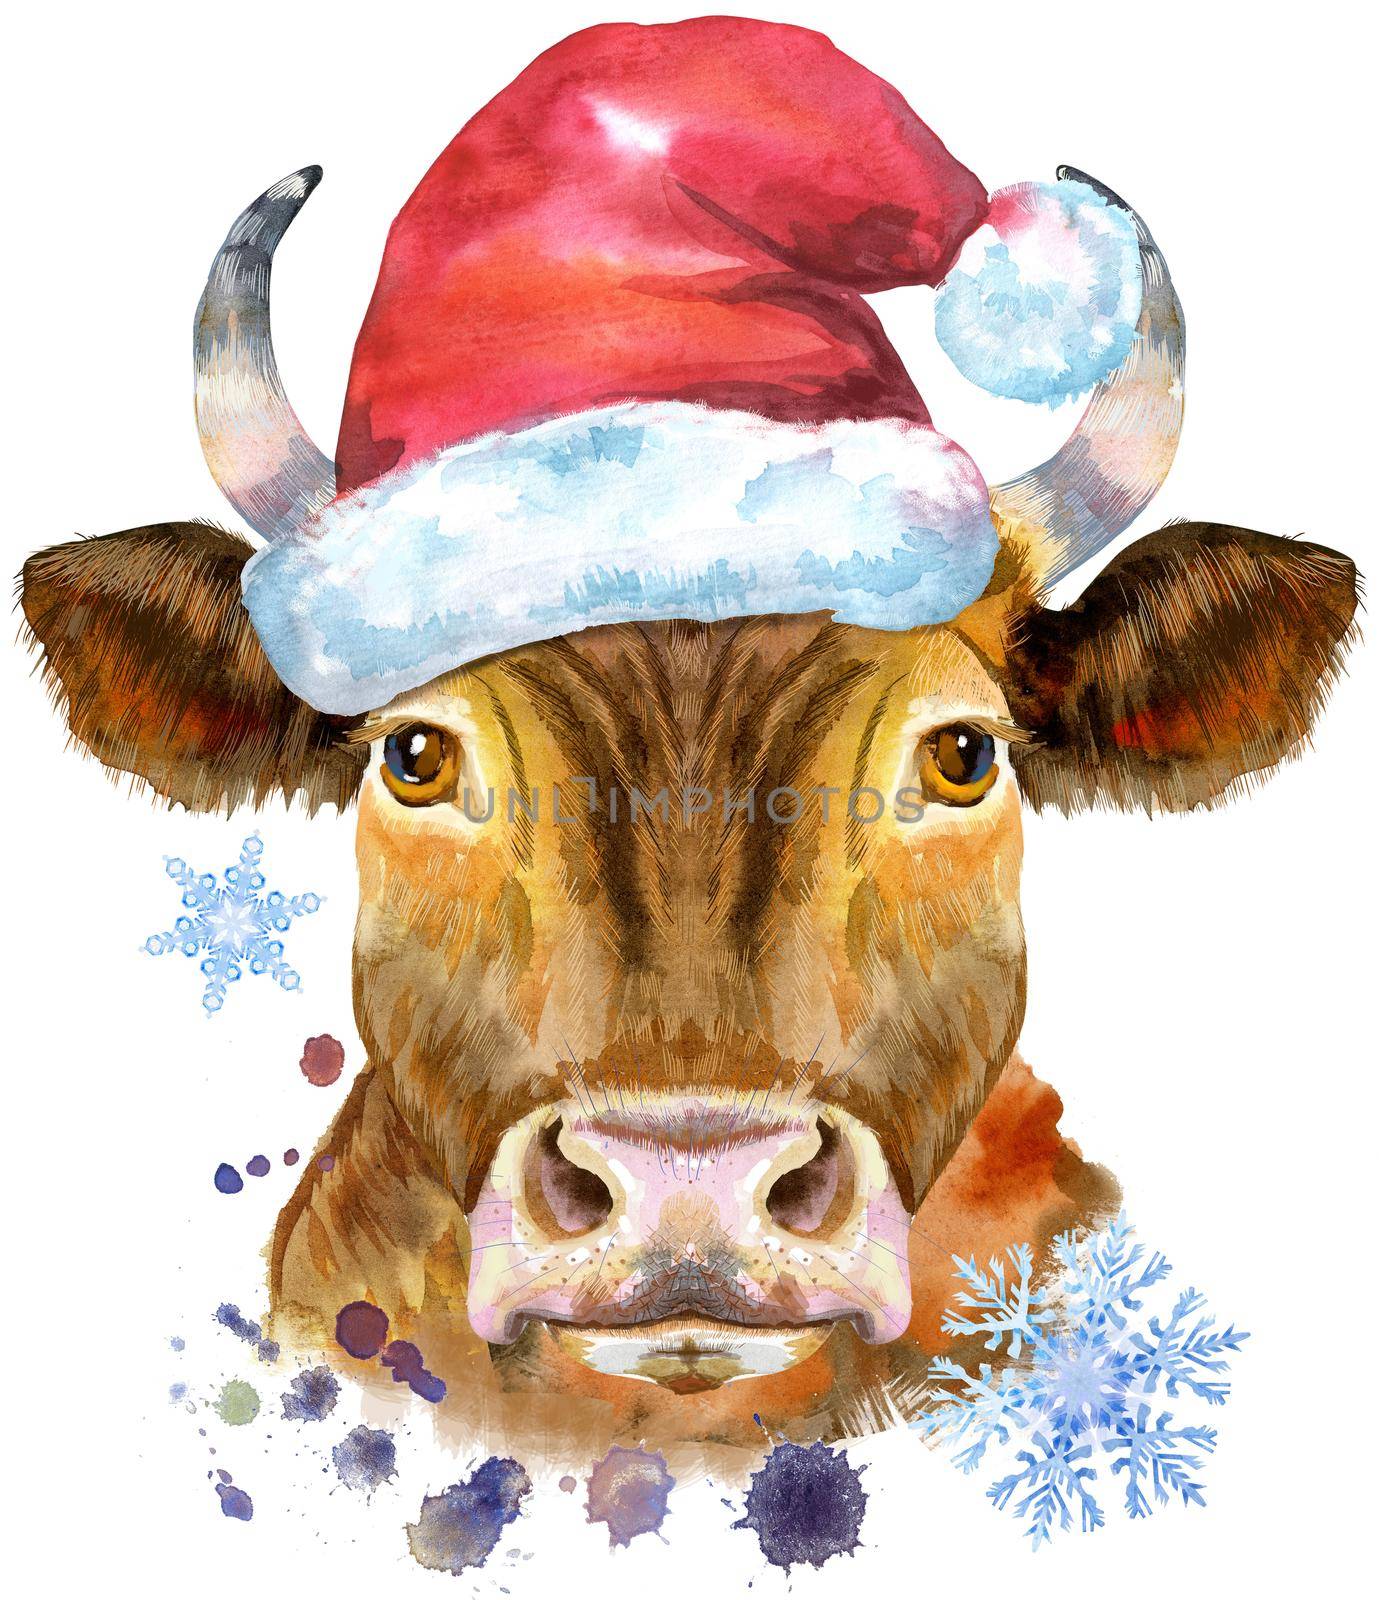 Bull watercolor graphics. Bull animal illustration in Santa hat with splashes watercolor textured background.